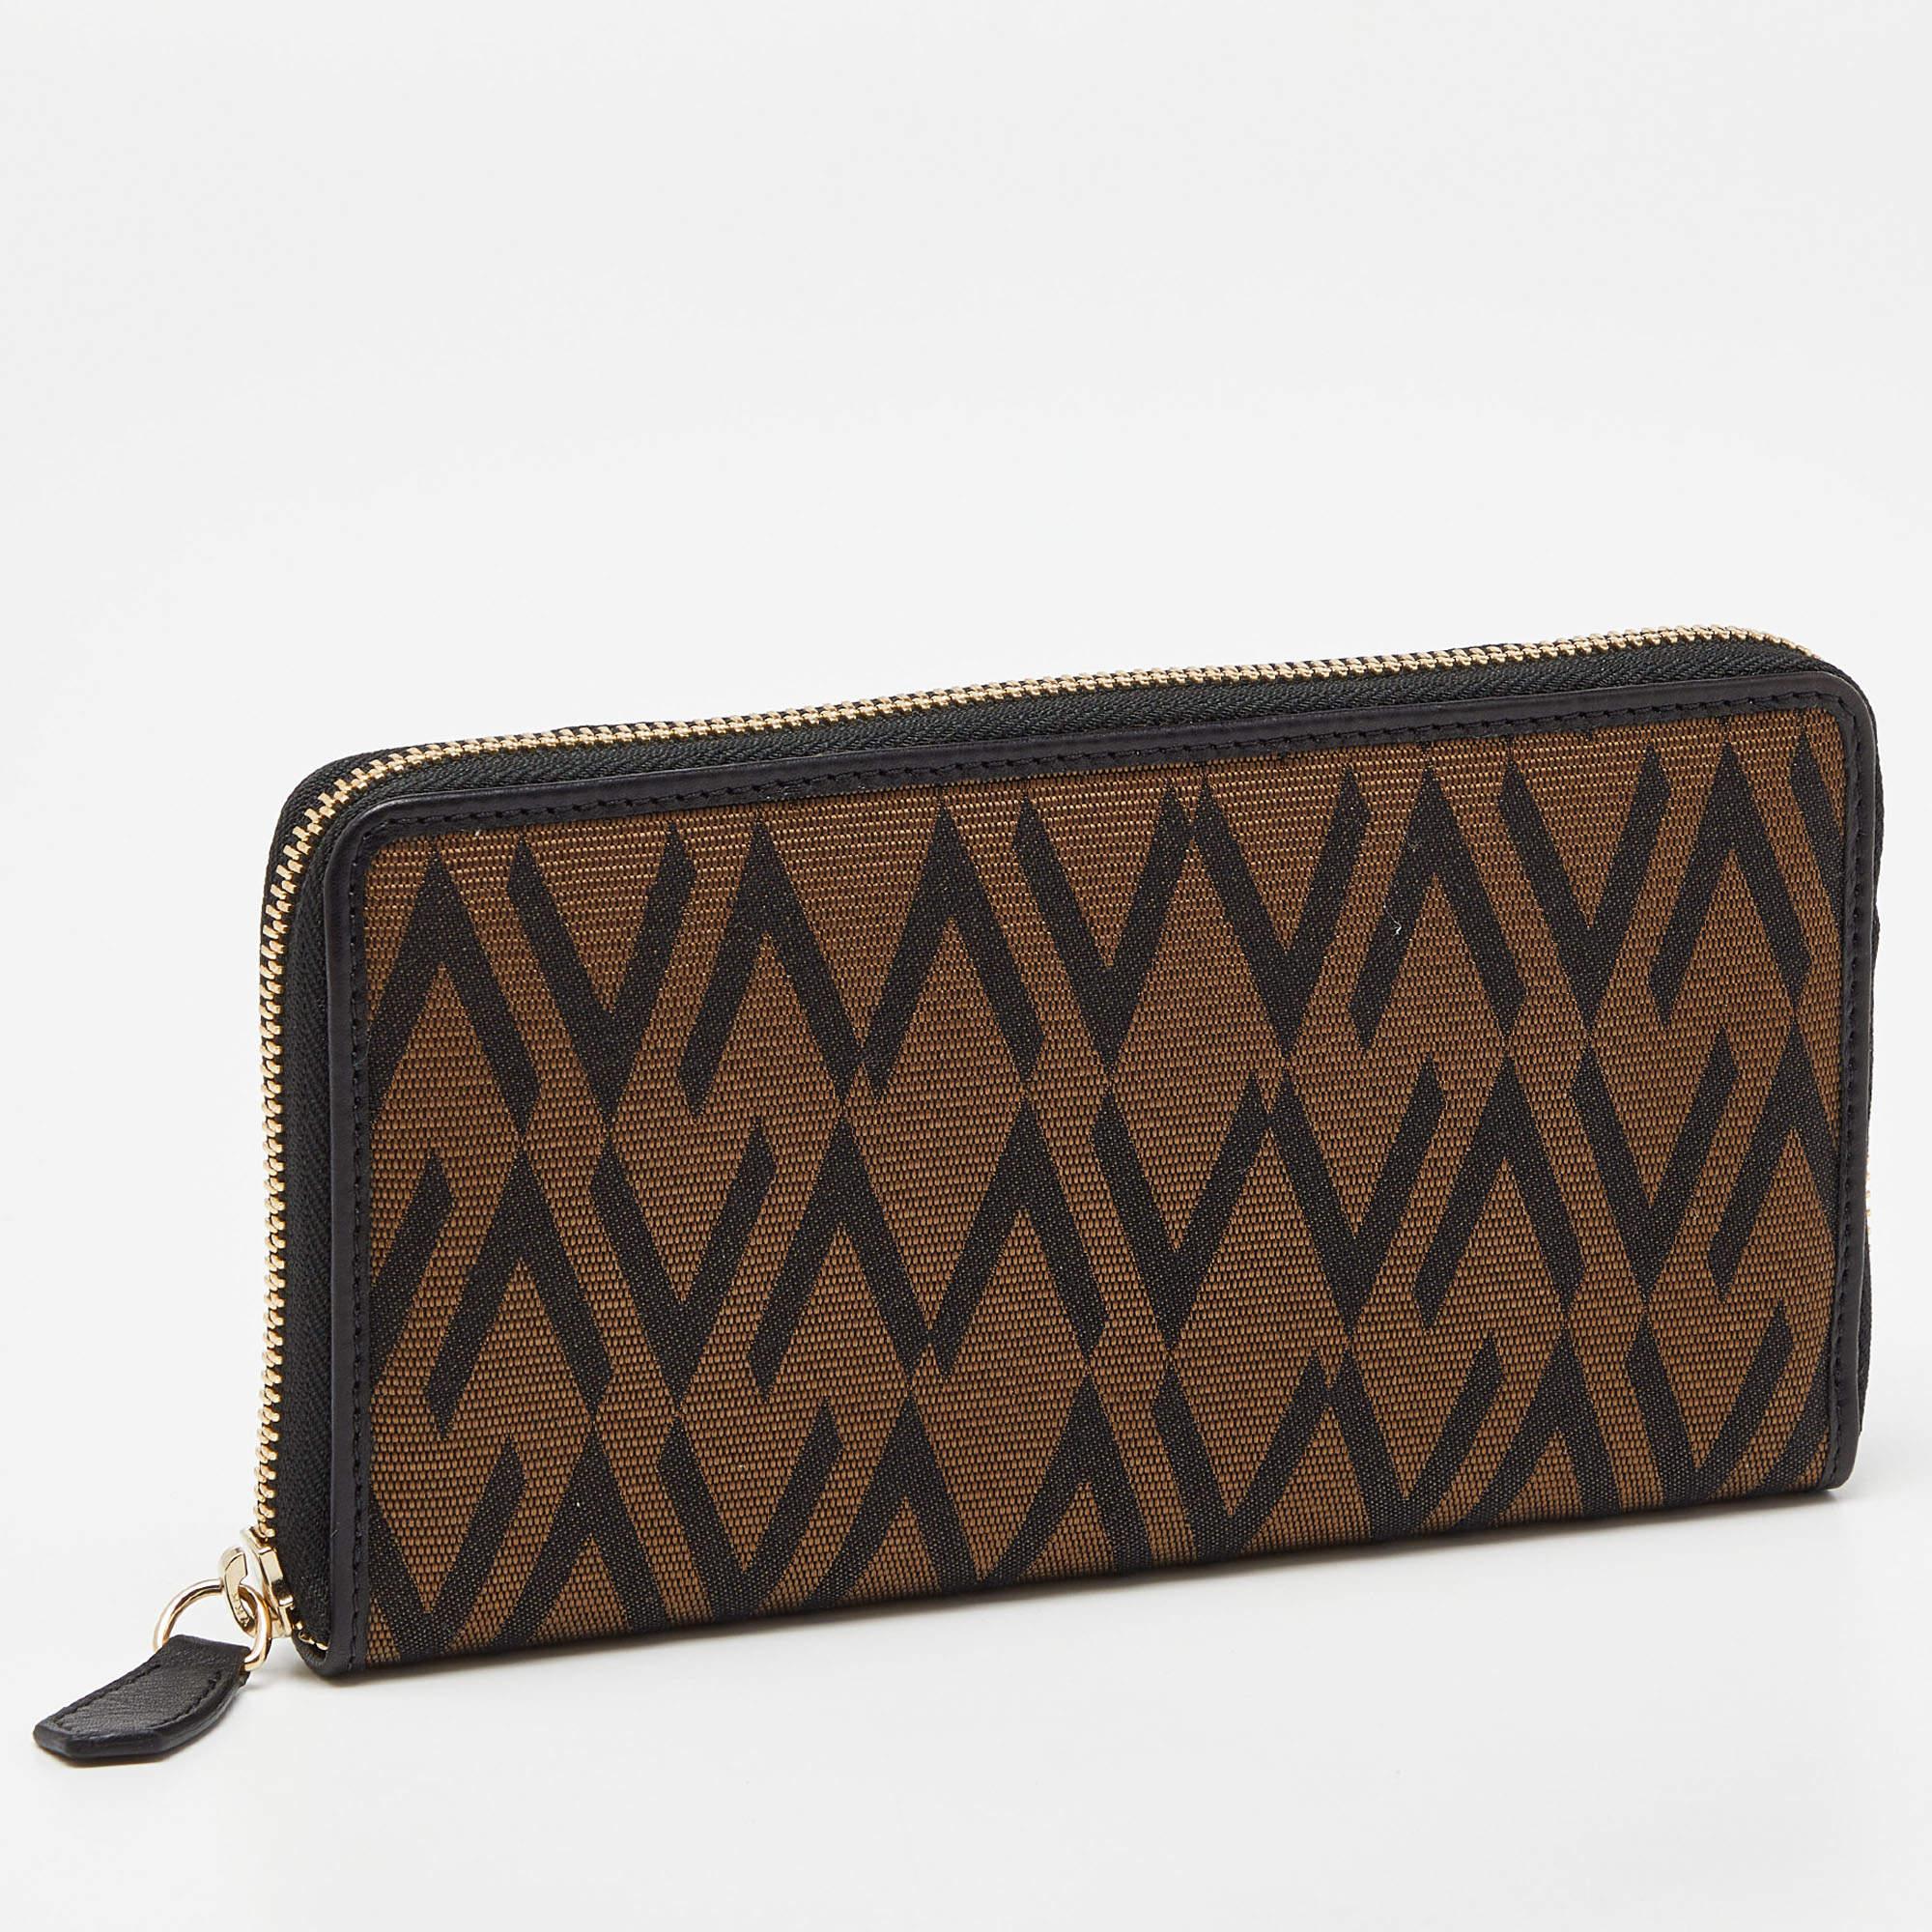 This Valentino wallet is an immaculate balance of sophistication and rational utility. It has been designed using prime quality materials and elevated by a sleek finish. The creation is equipped with ample space for your monetary essentials.

